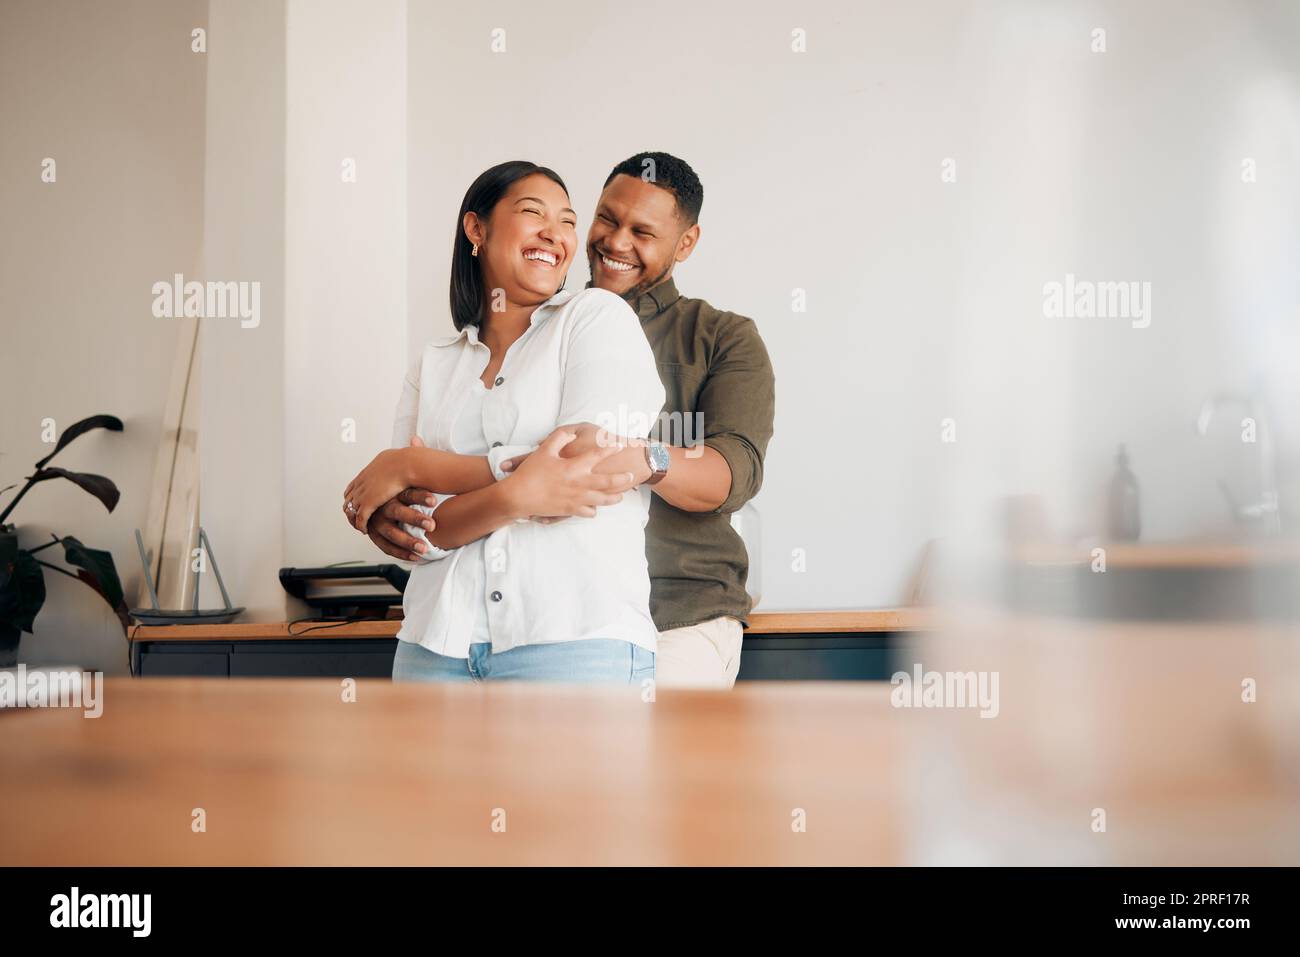 Hugging, romance and playful couple enjoying cuddle, love and bonding while laughing together at home. Loving husband giving affection, care and embrace to his happy, relaxing and funny wife Stock Photo